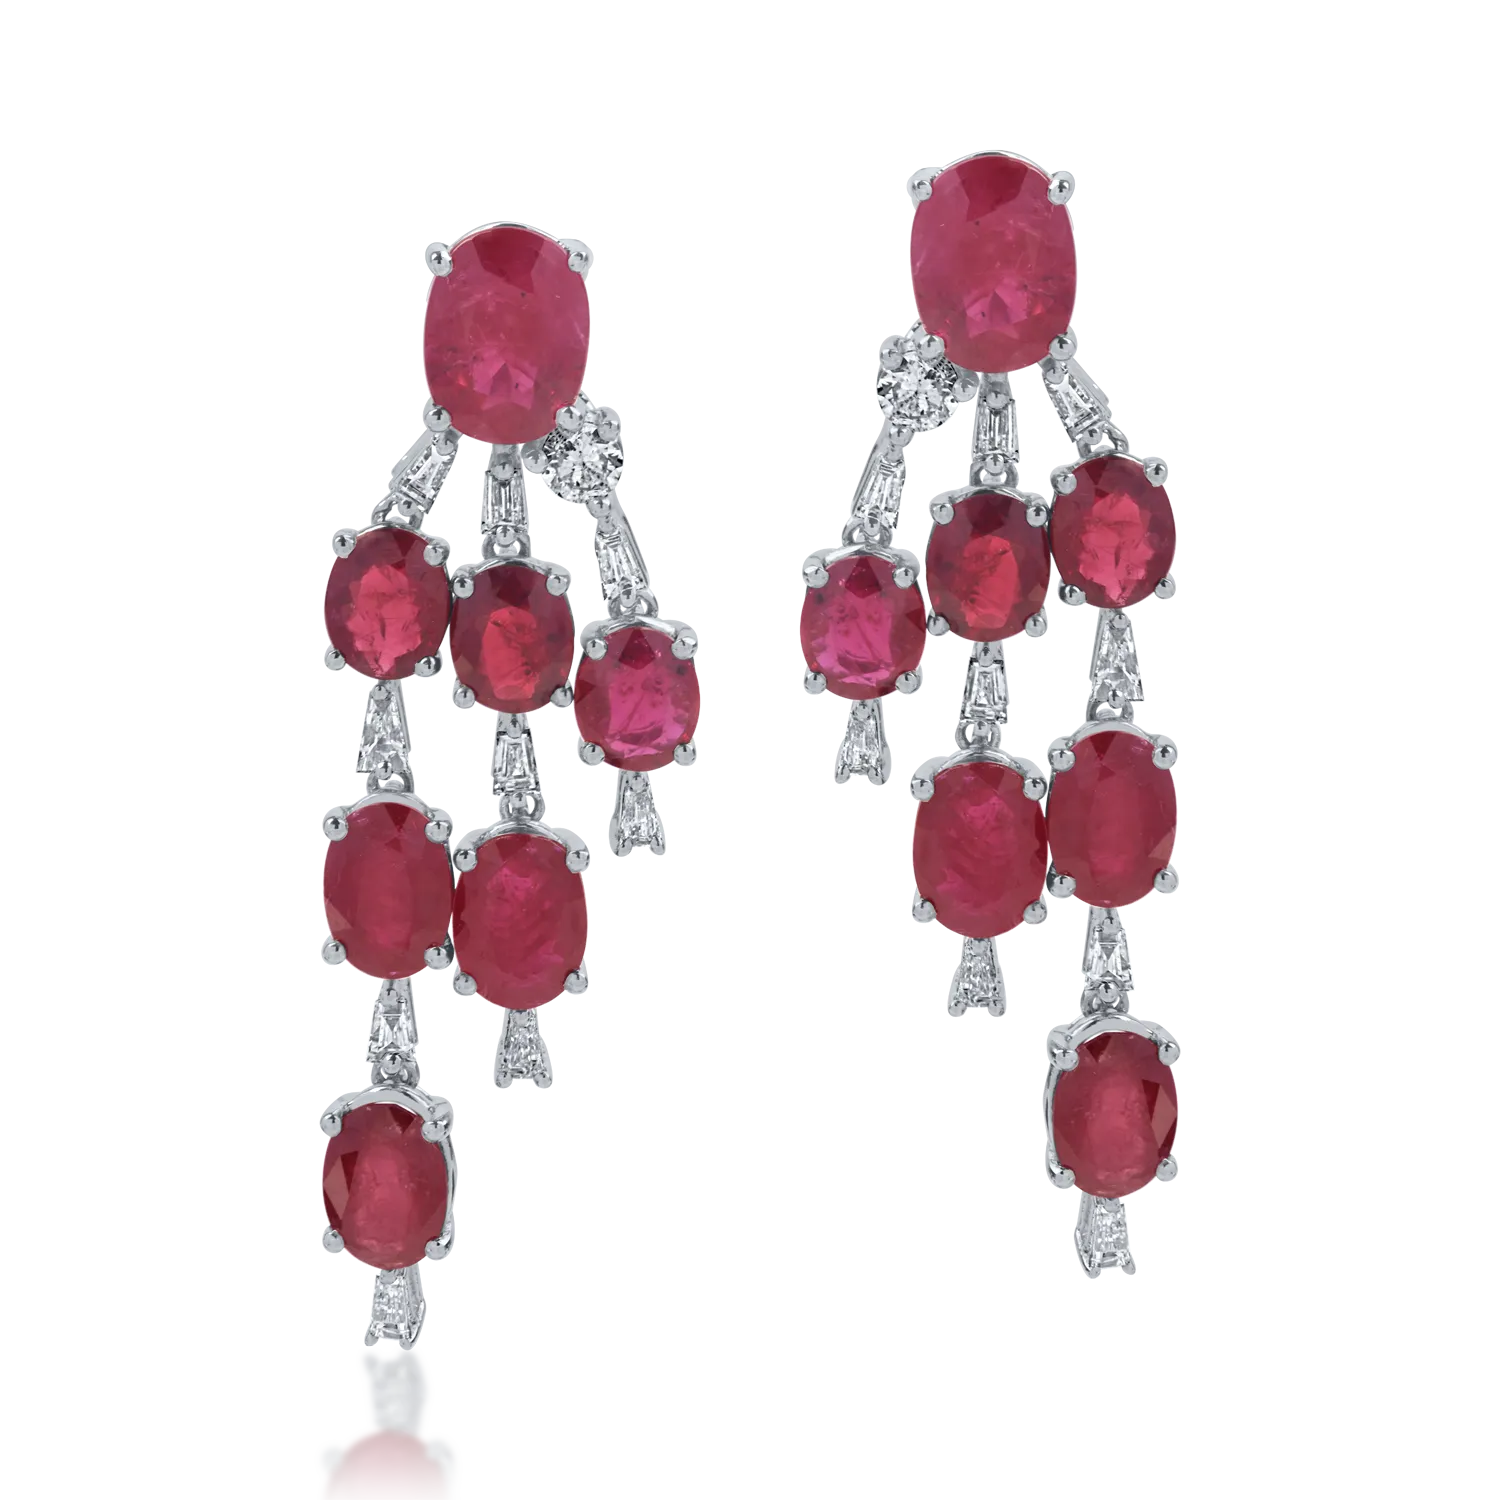 White gold earrings with 7.48ct rubies and 0.52ct diamonds